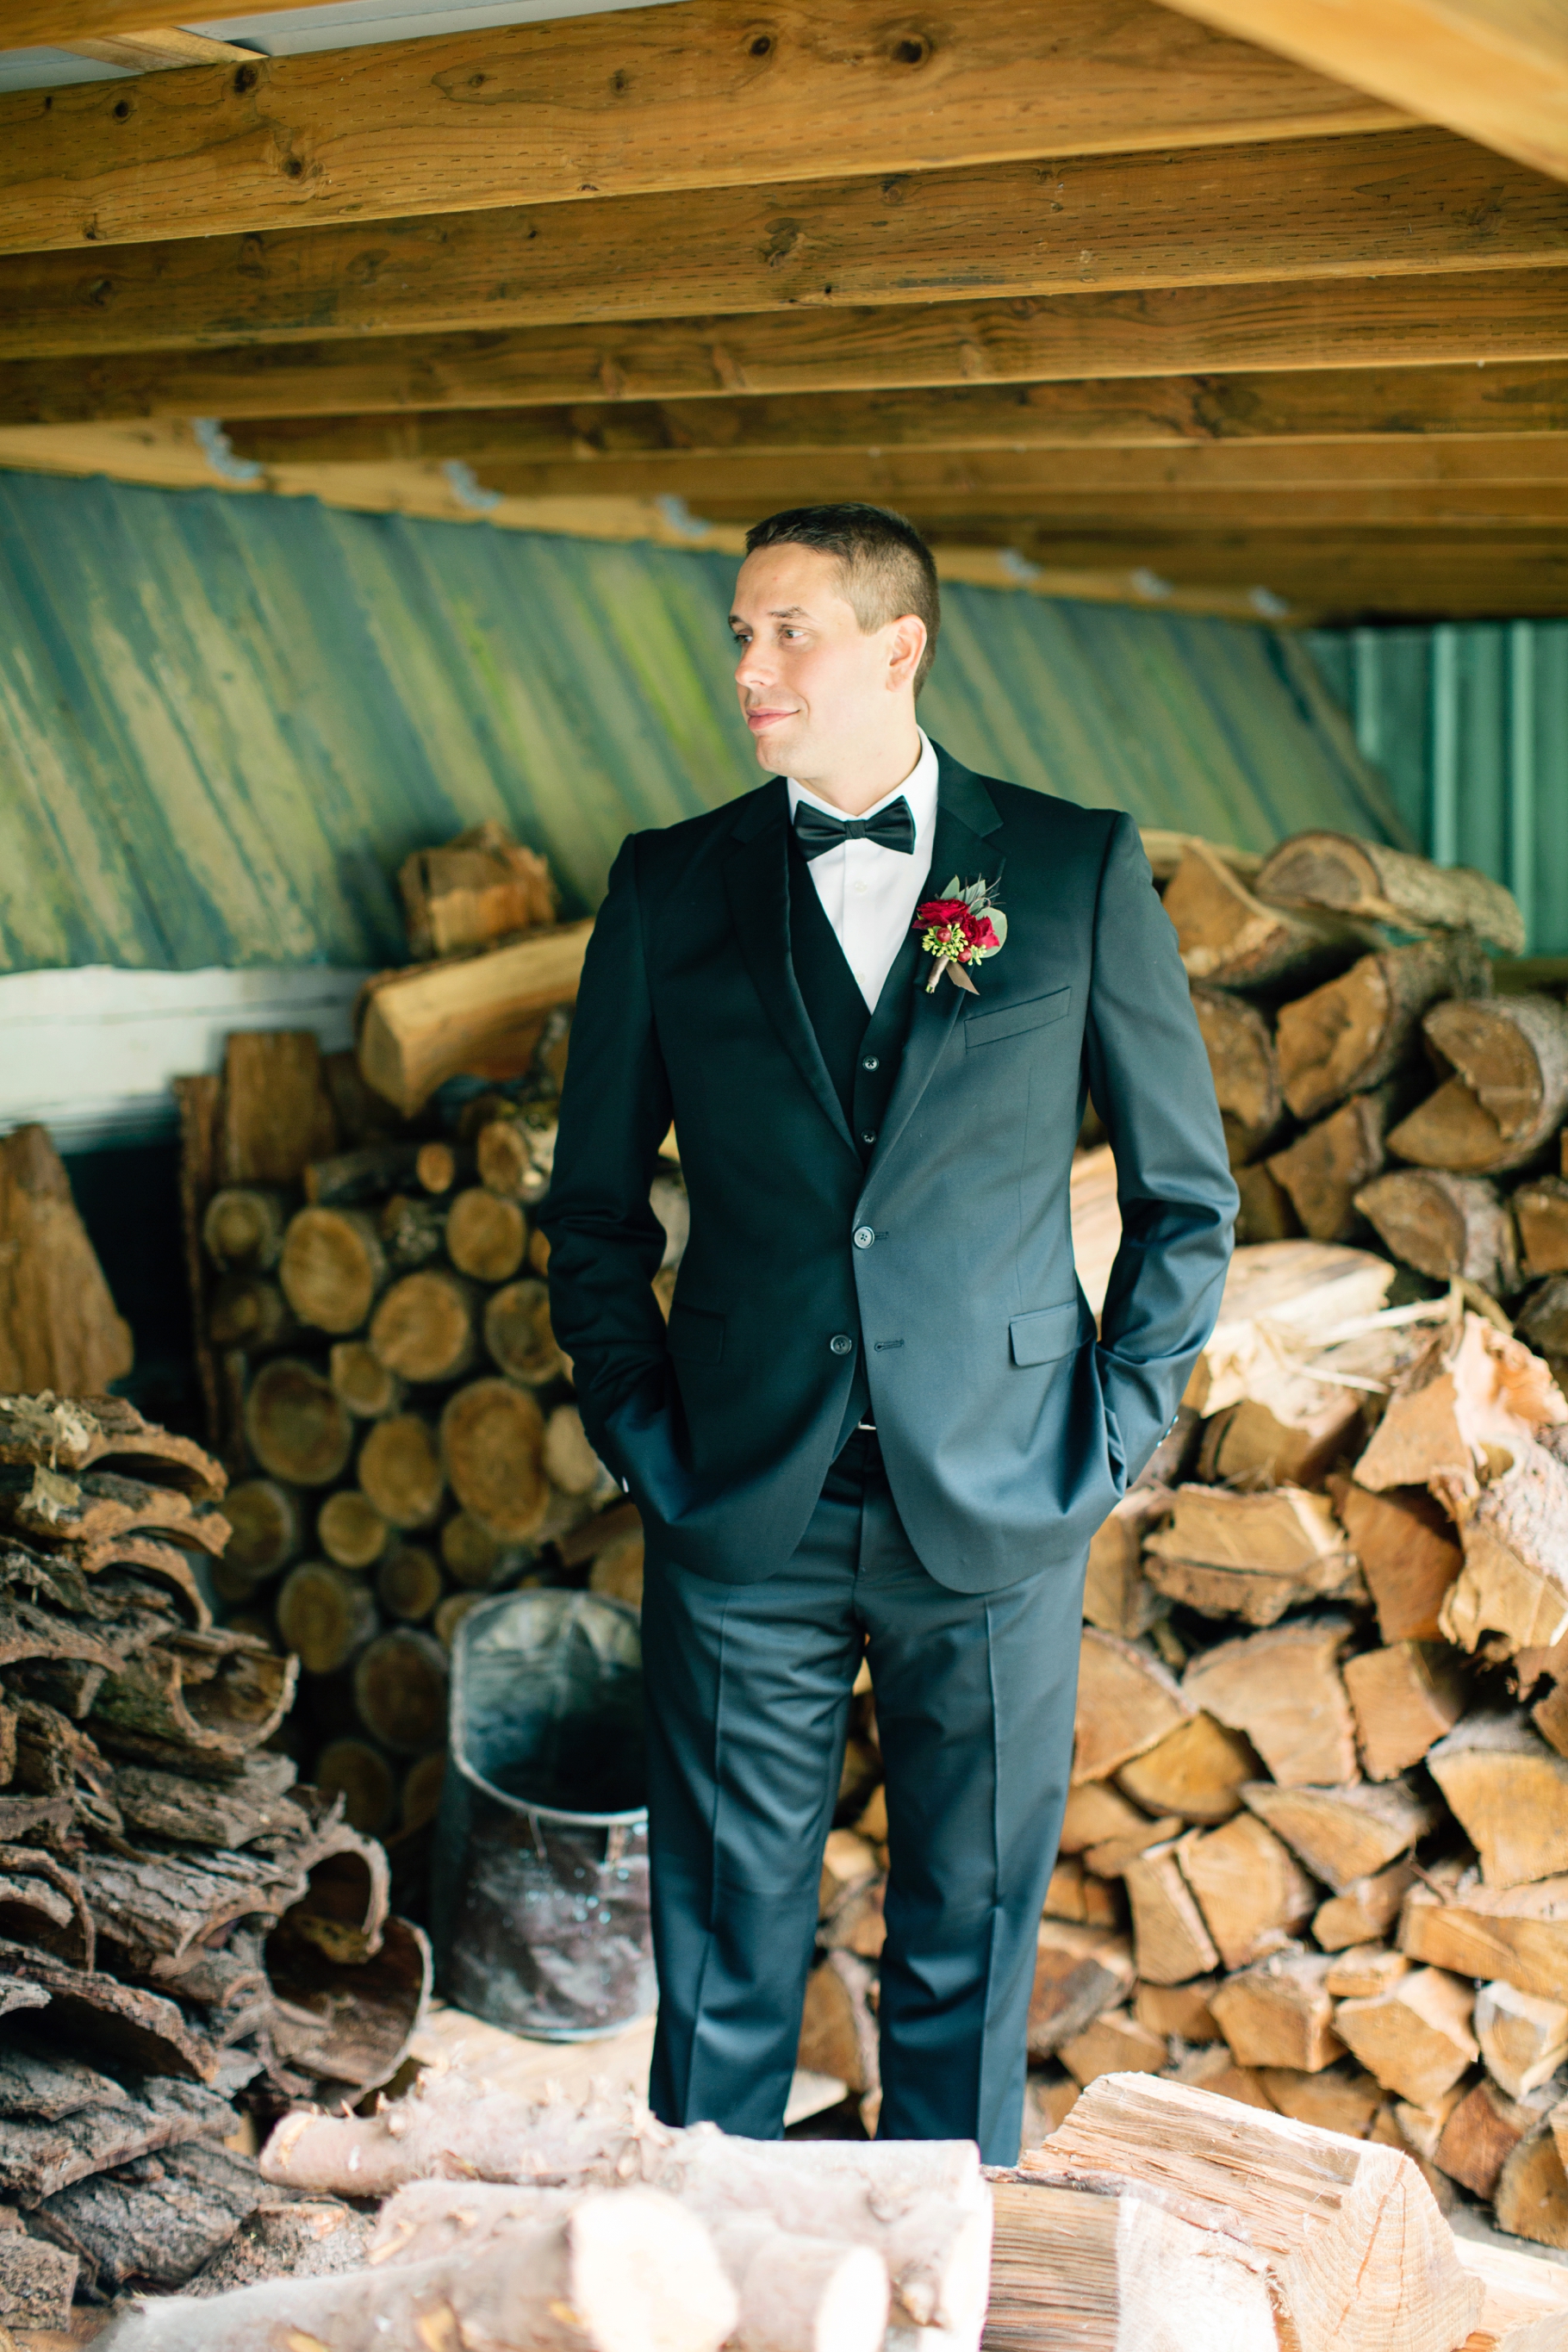 18-Groom-Portraits-Wood-Shed-Delille-Cellars-Chateau-Vineyard-Woodinville-Wedding-Photographer-Photography-by-Betty-Elaine